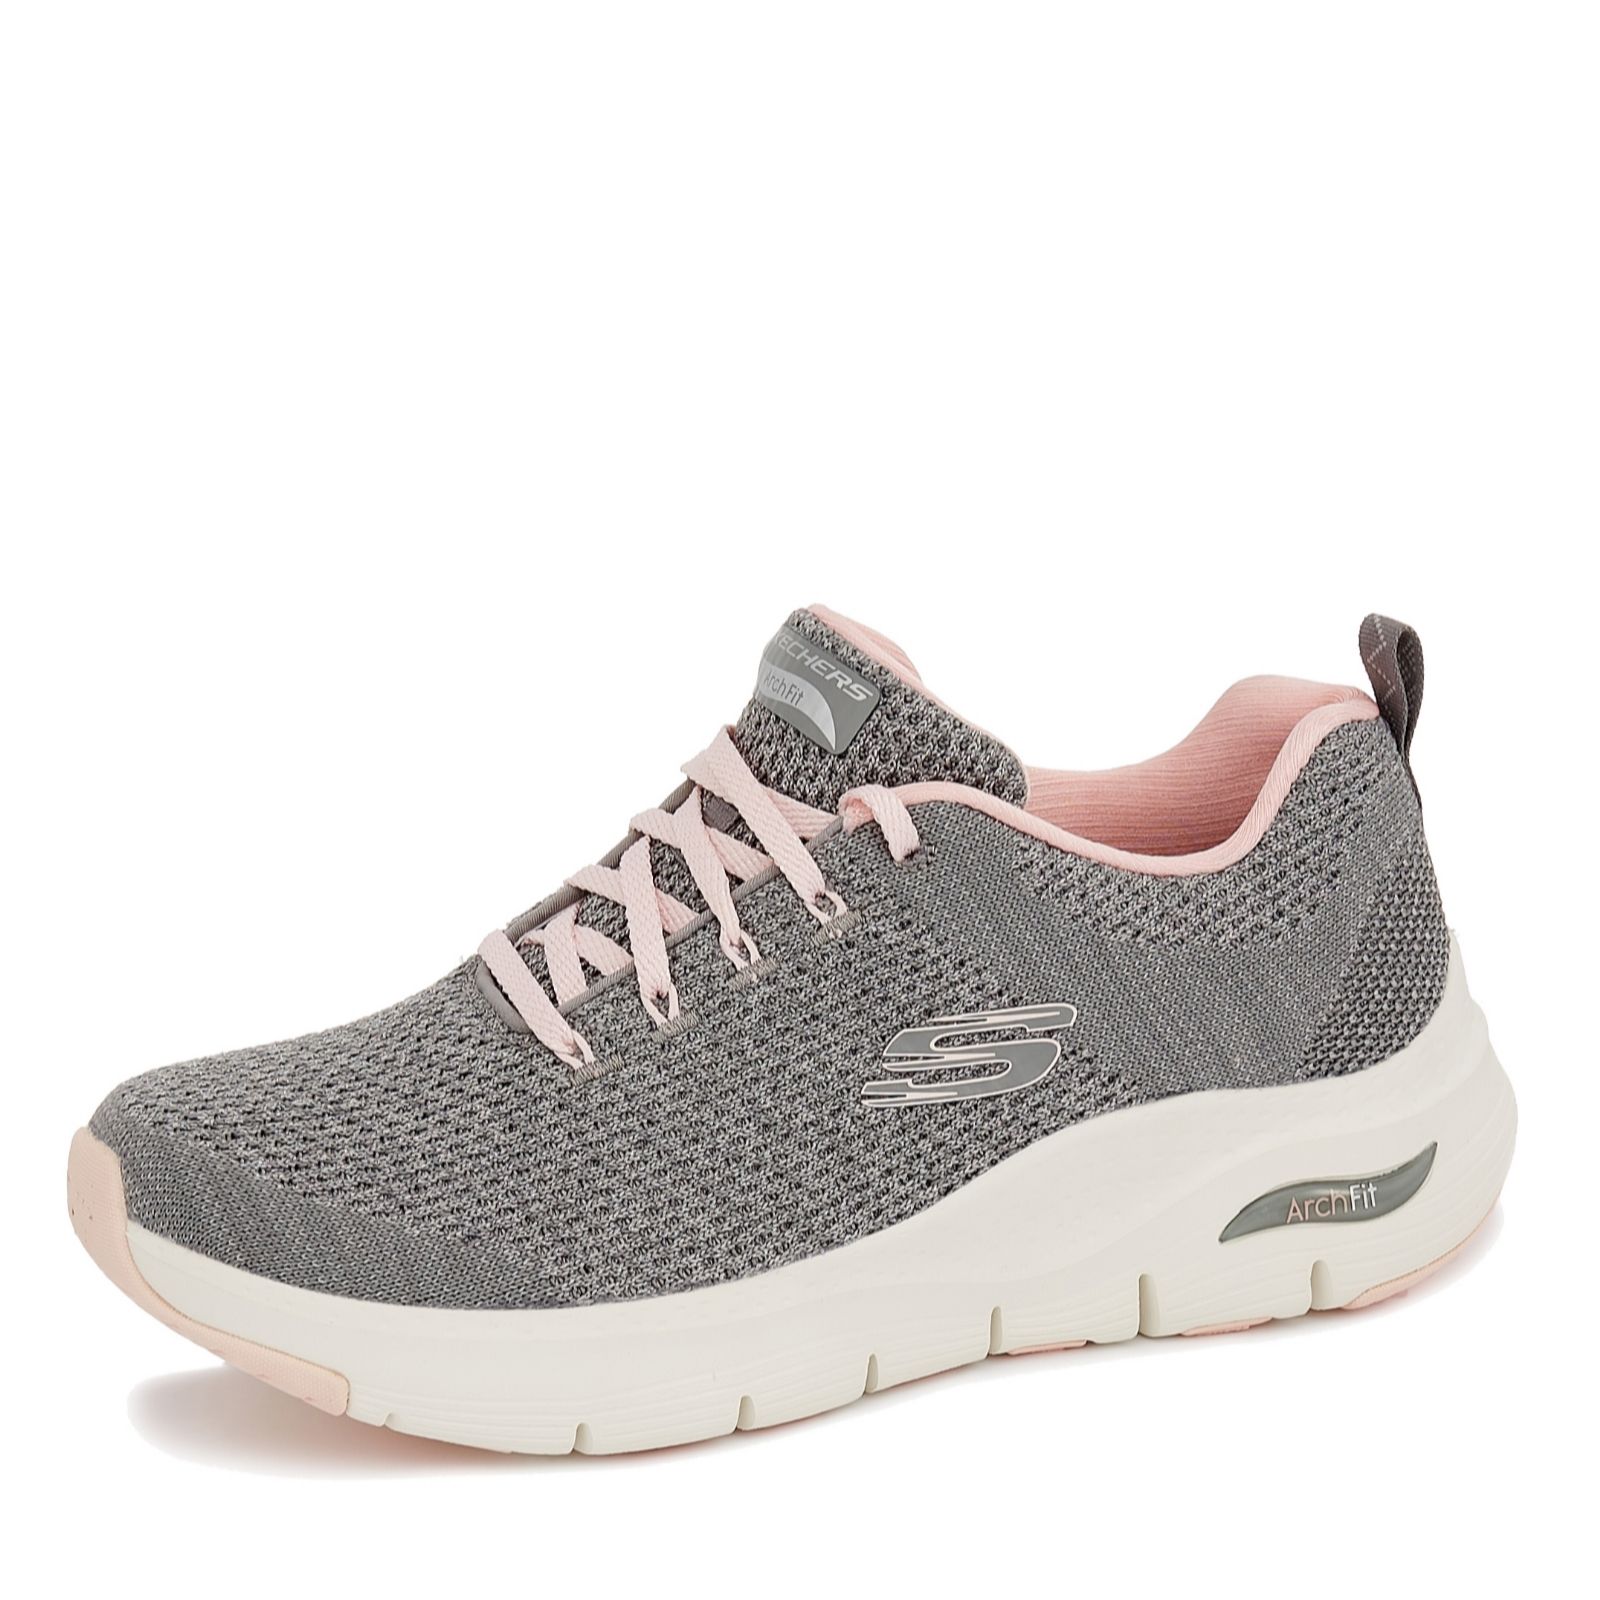 Skechers Arch Fit Engineered Mesh Lace 